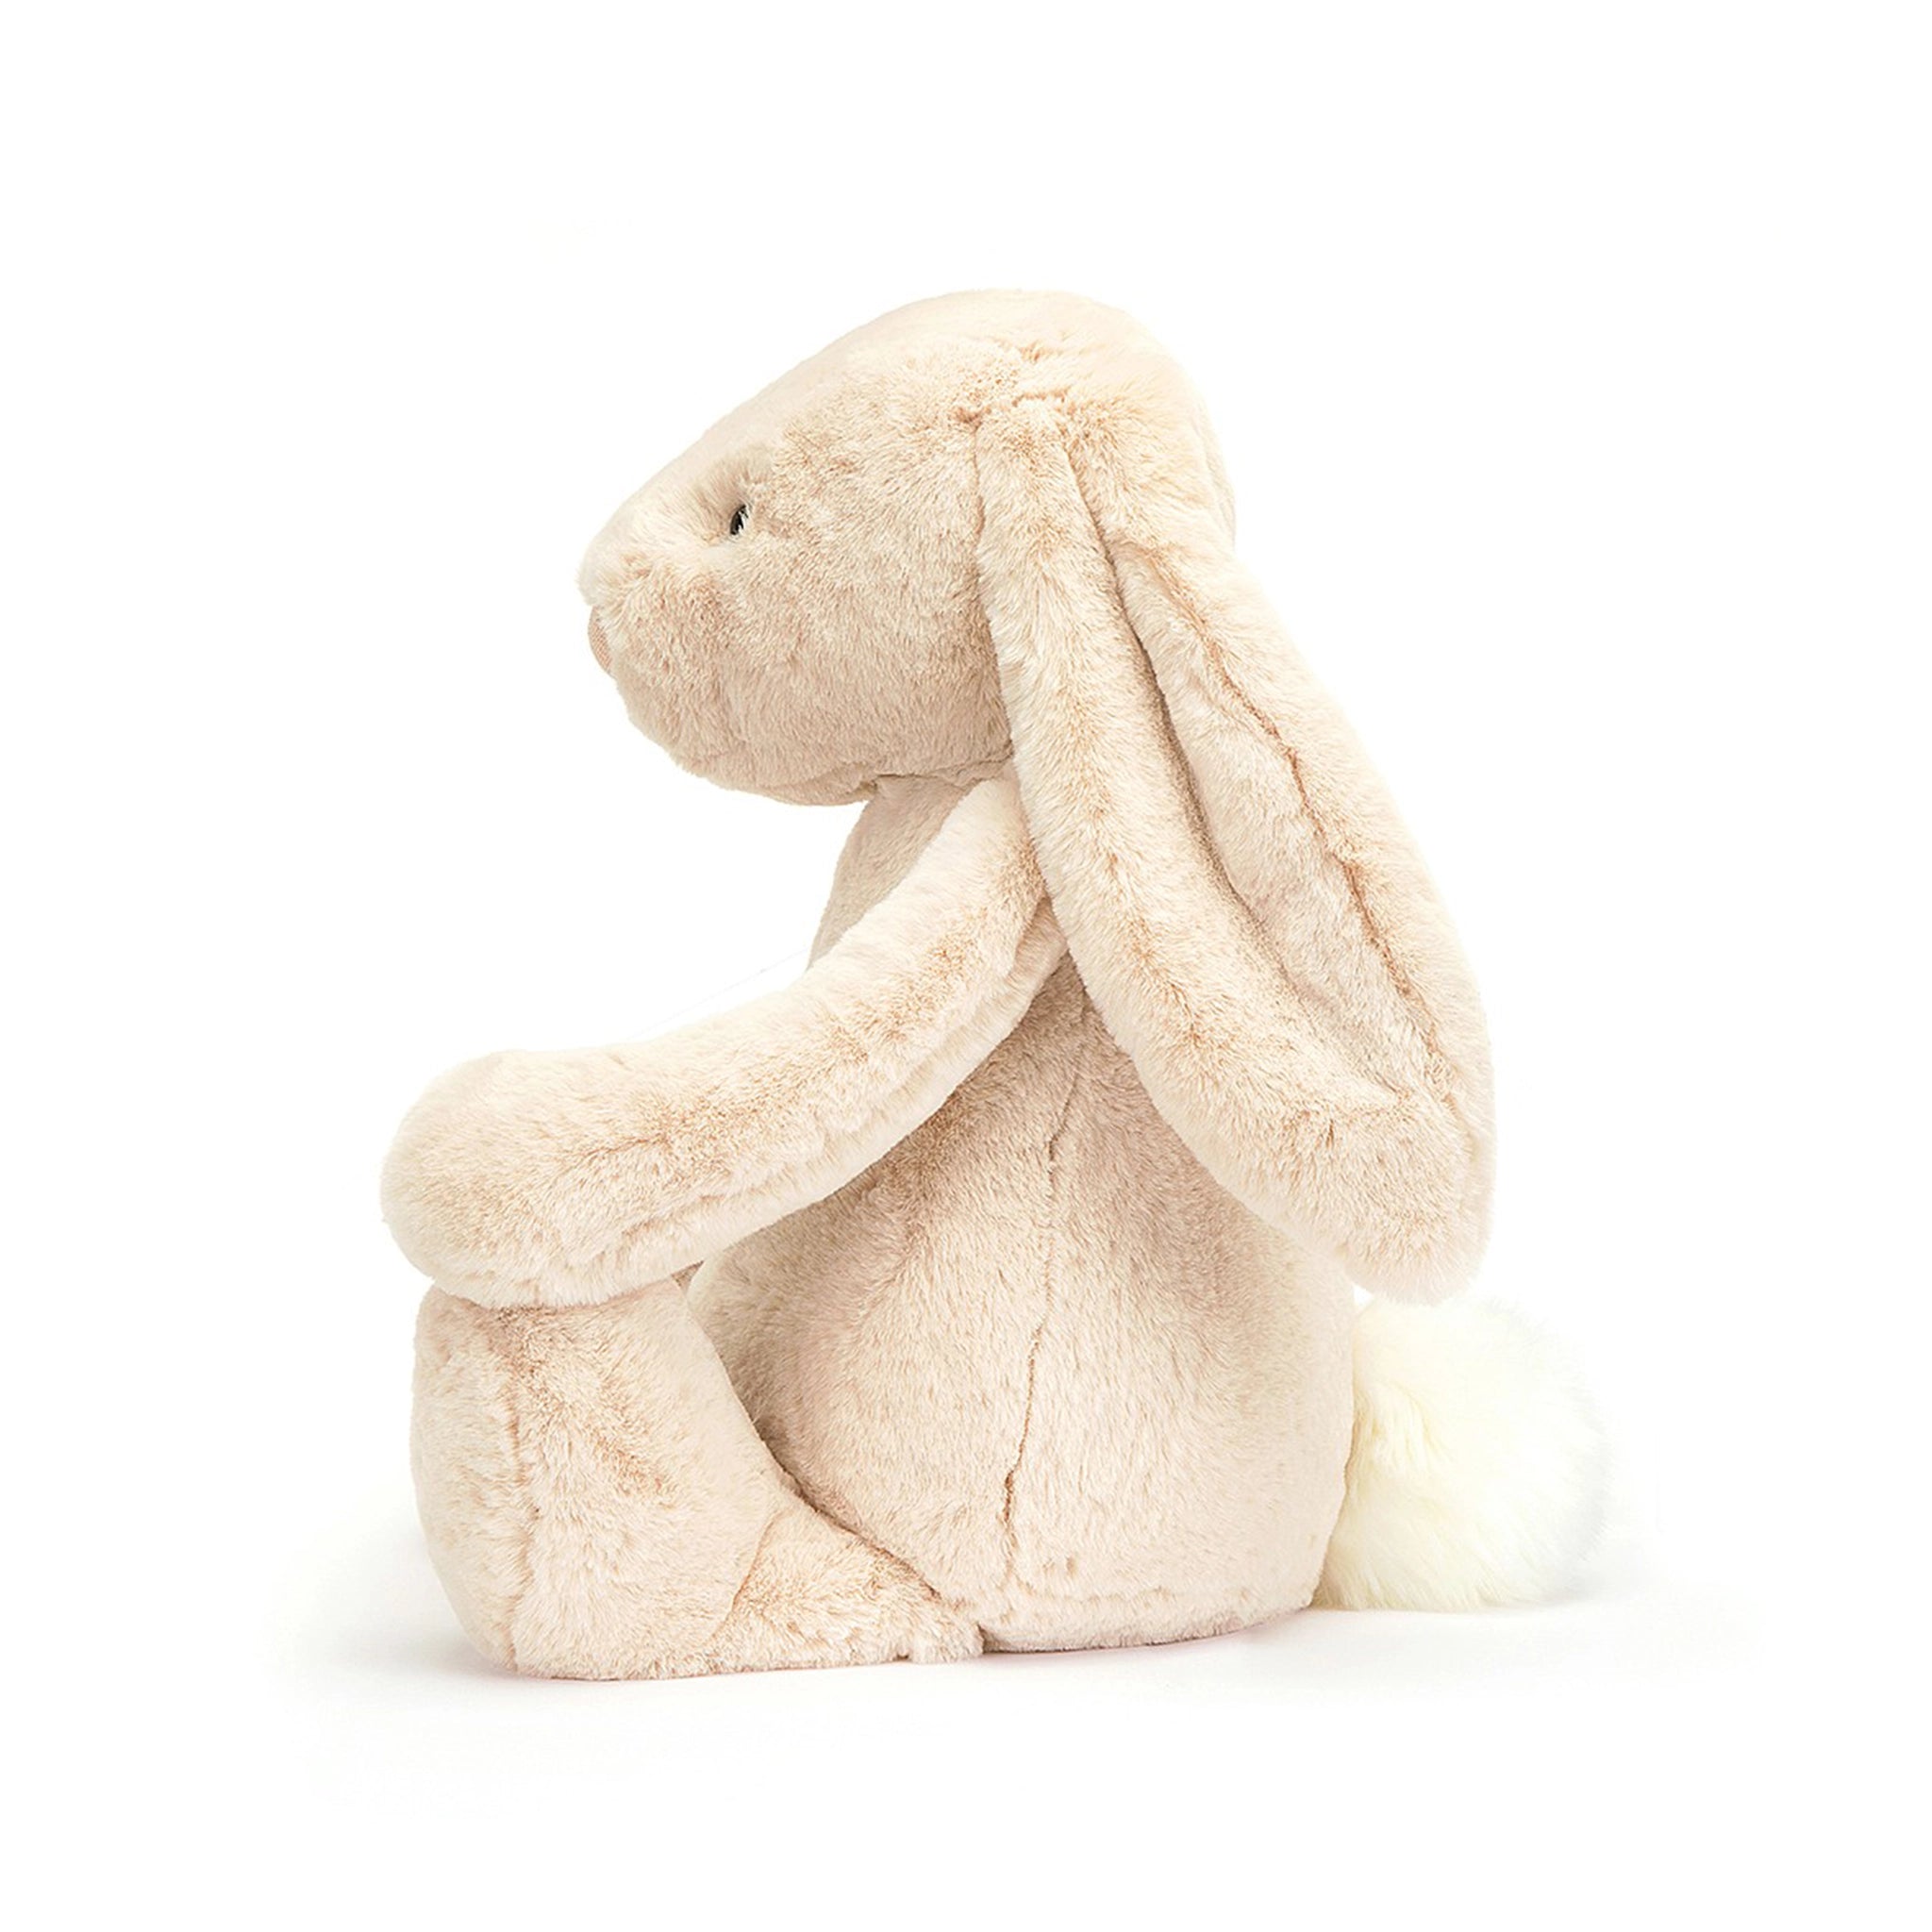 On a white background is a cream colored stuffed animal bunny with long floppy ears and super soft faux fur plus a fluffy tail. 